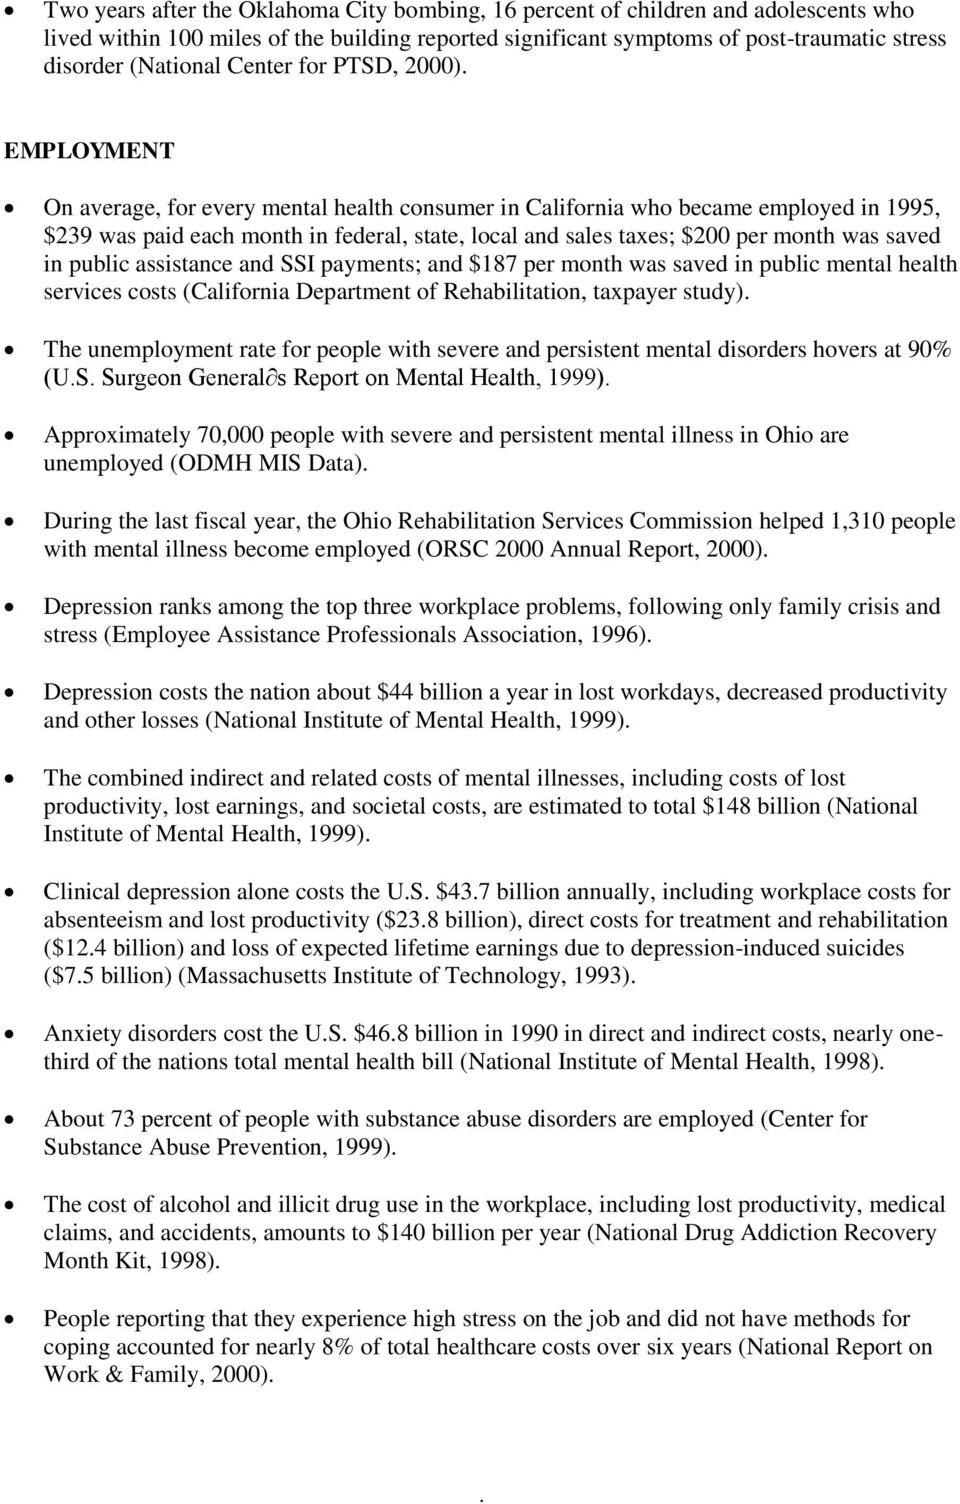 month was saved in public assistance and SSI payments; and $187 per month was saved in public mental health services costs (California Department of Rehabilitation, taxpayer study) The unemployment